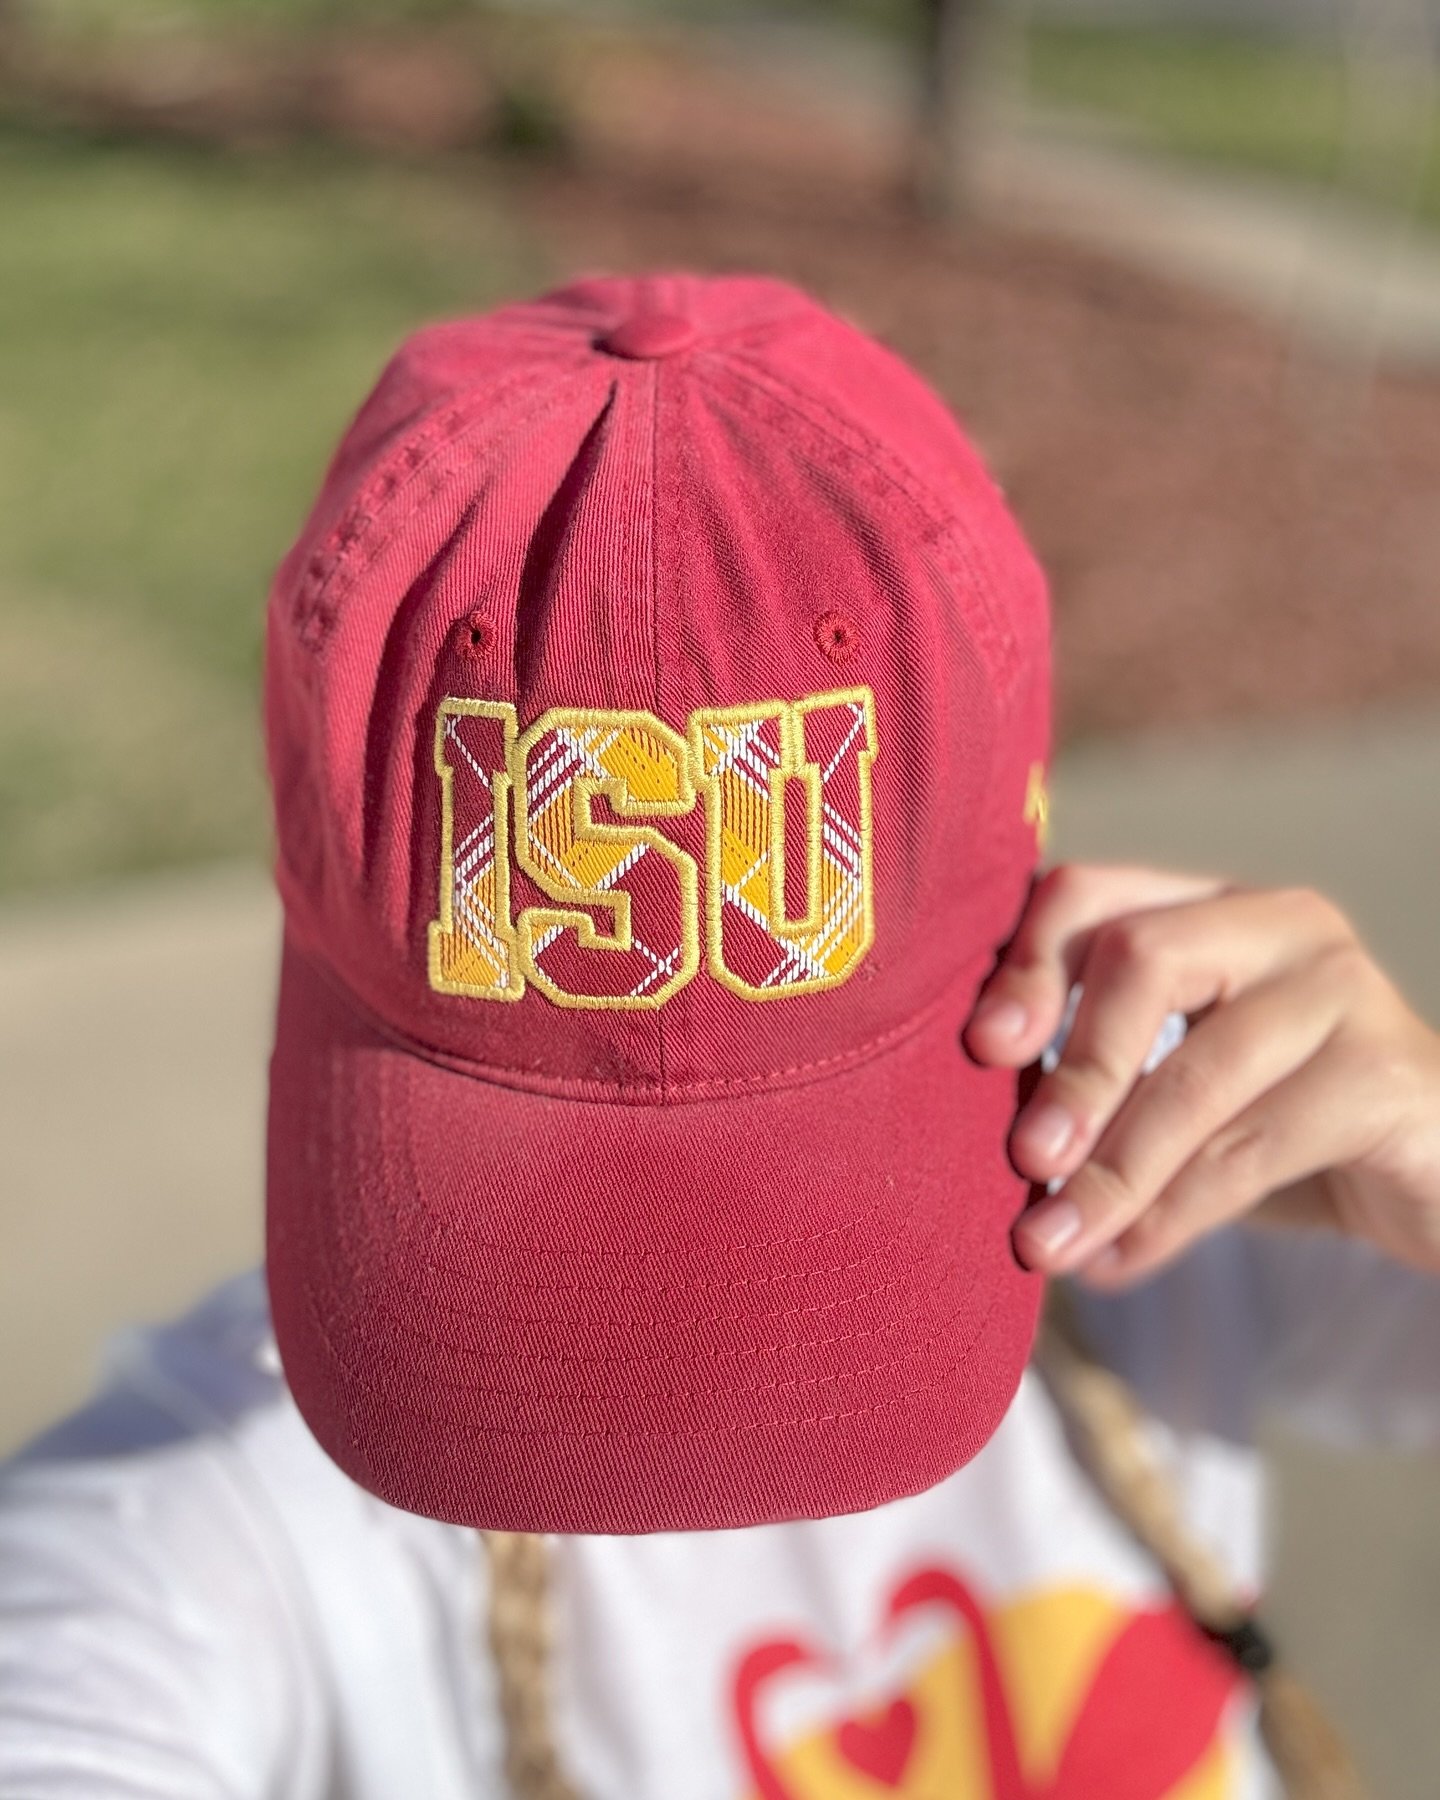 Keeping it shady and stylish since 1858 ❤️

#Innovate1858 #ForCyclonesByCyclones
#BaseballHat